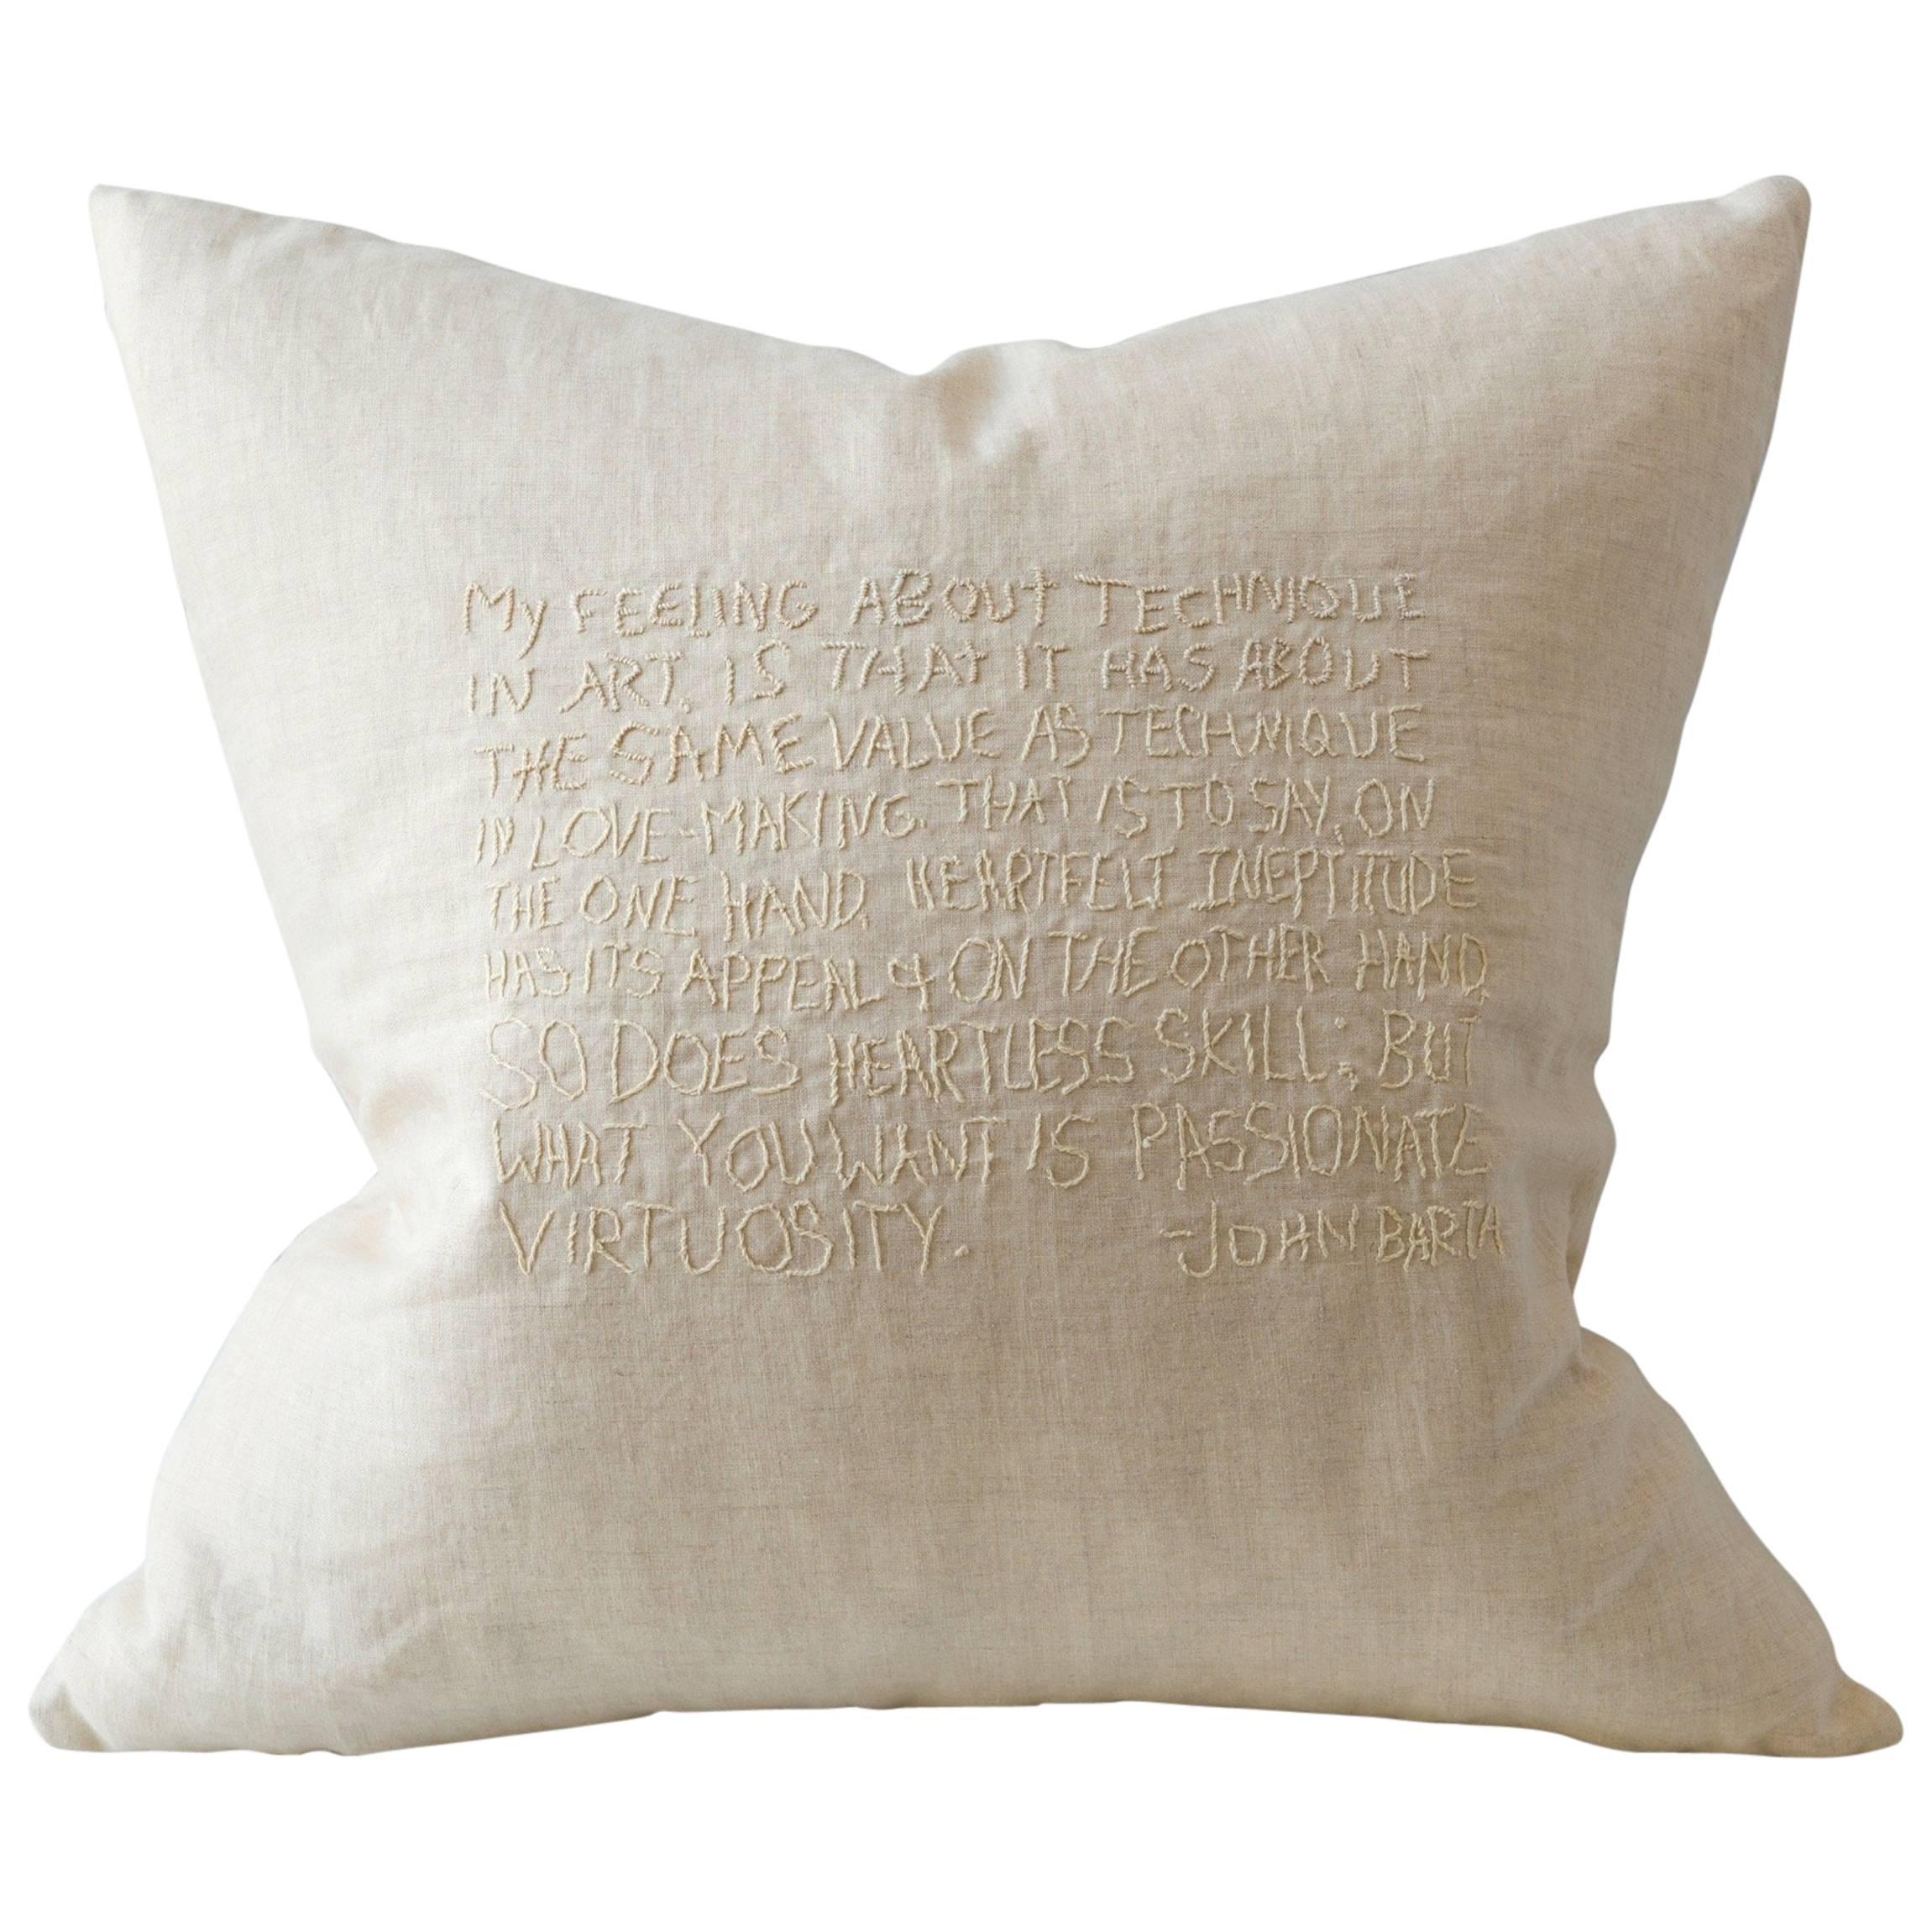 Embroidered Text Cushion John Barth For Sale